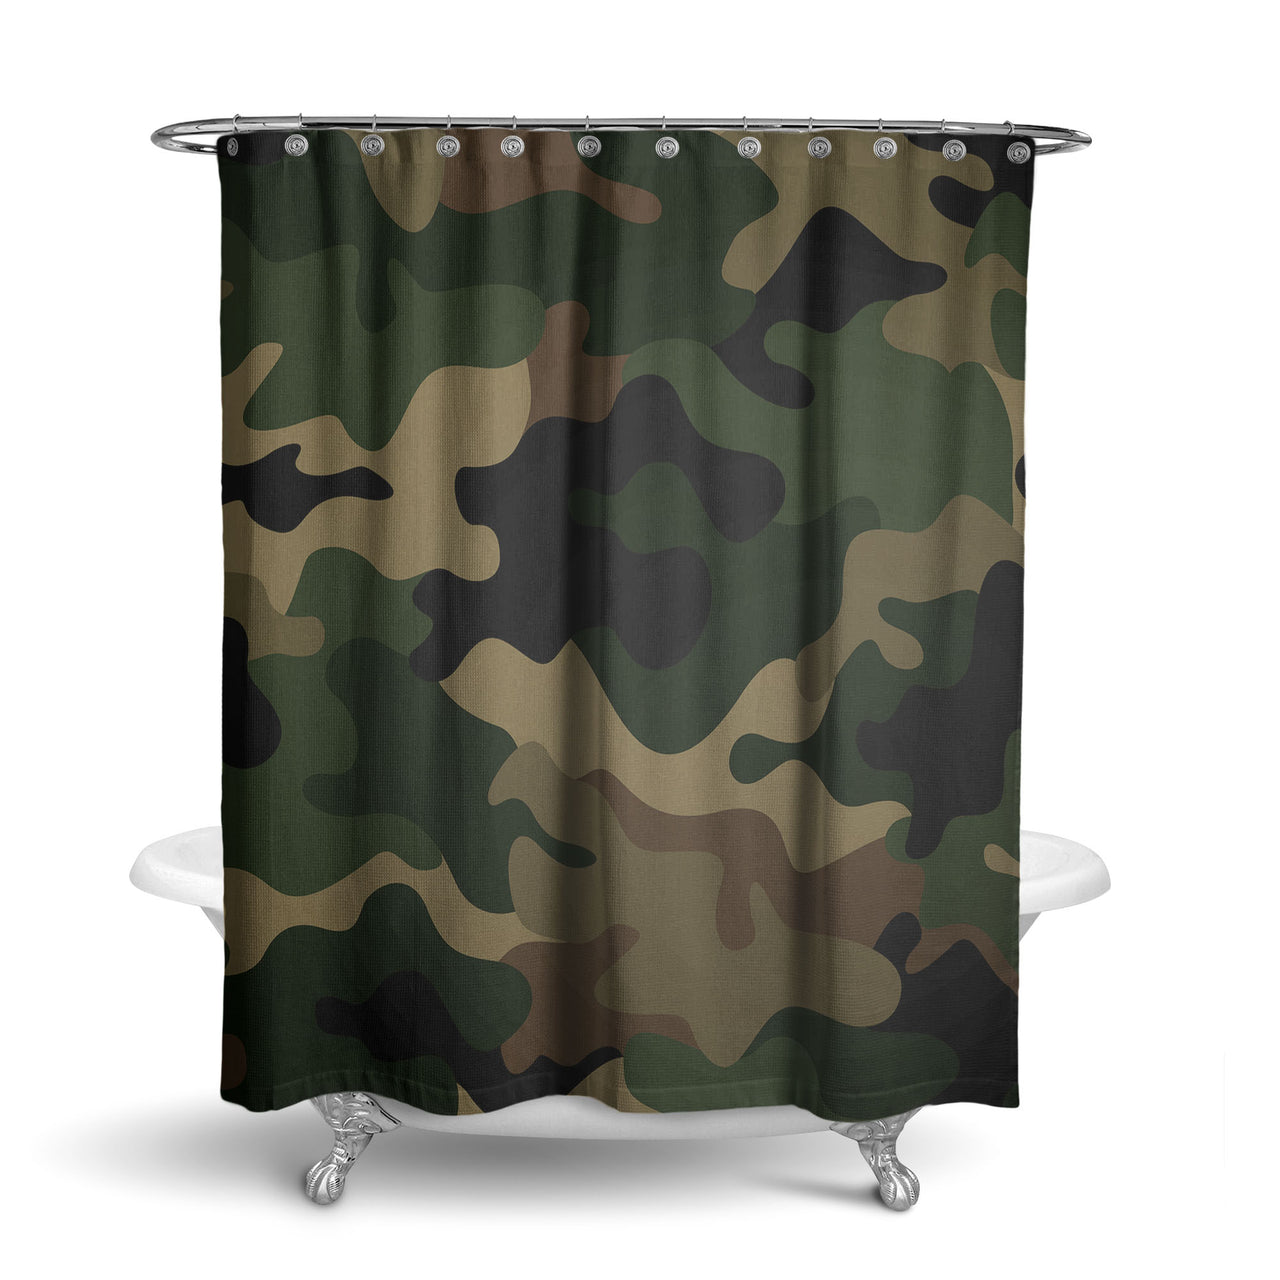 Military Camouflage Army Green Designed Shower Curtains